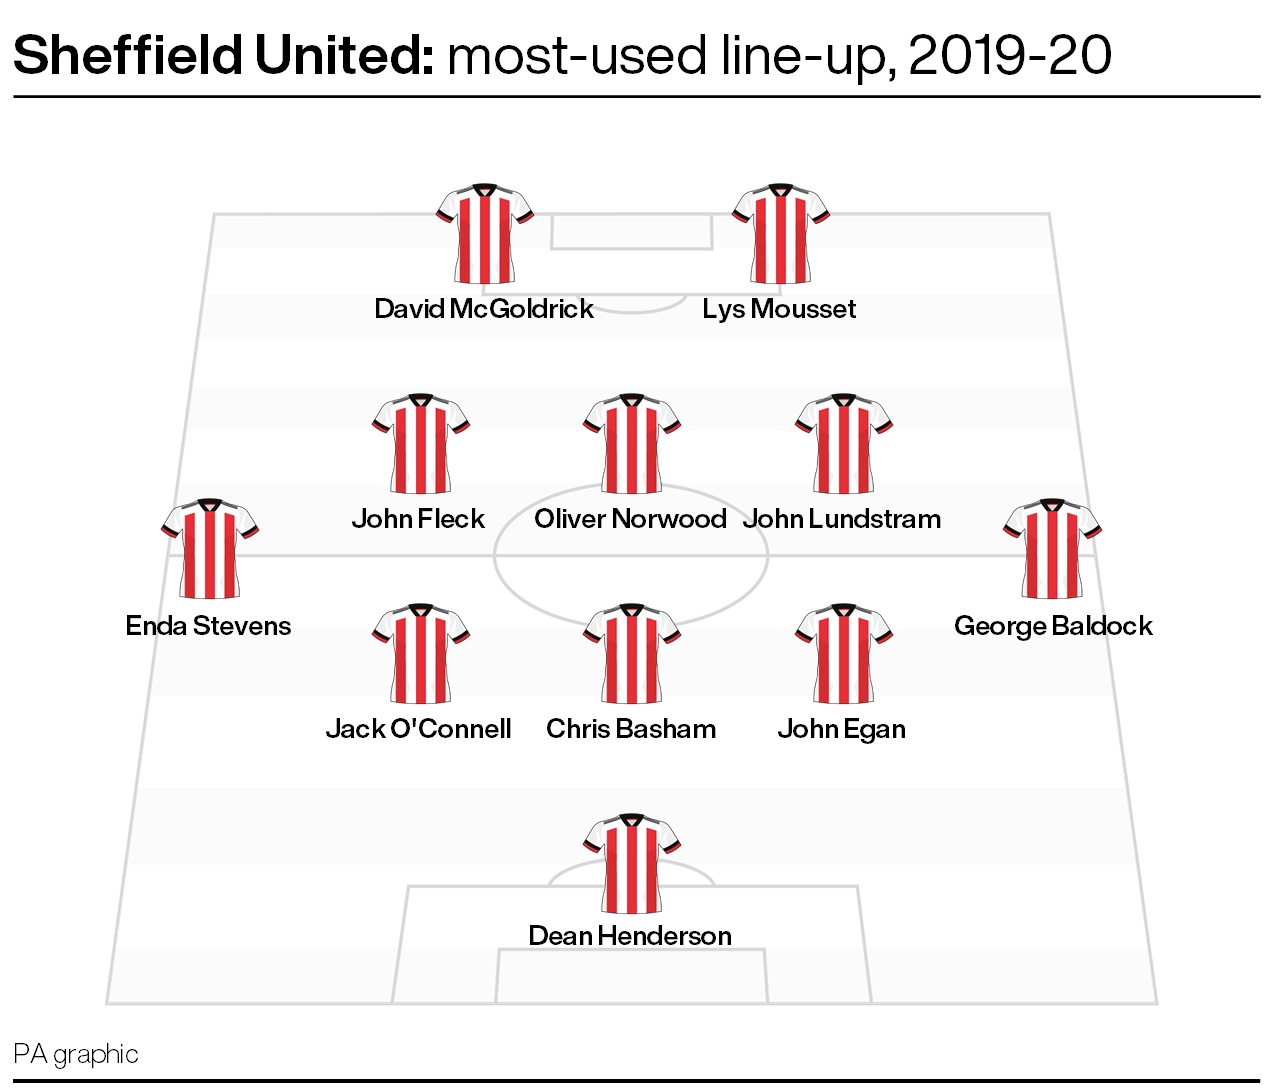 Sheffield United's most-used line-up from 2019-20